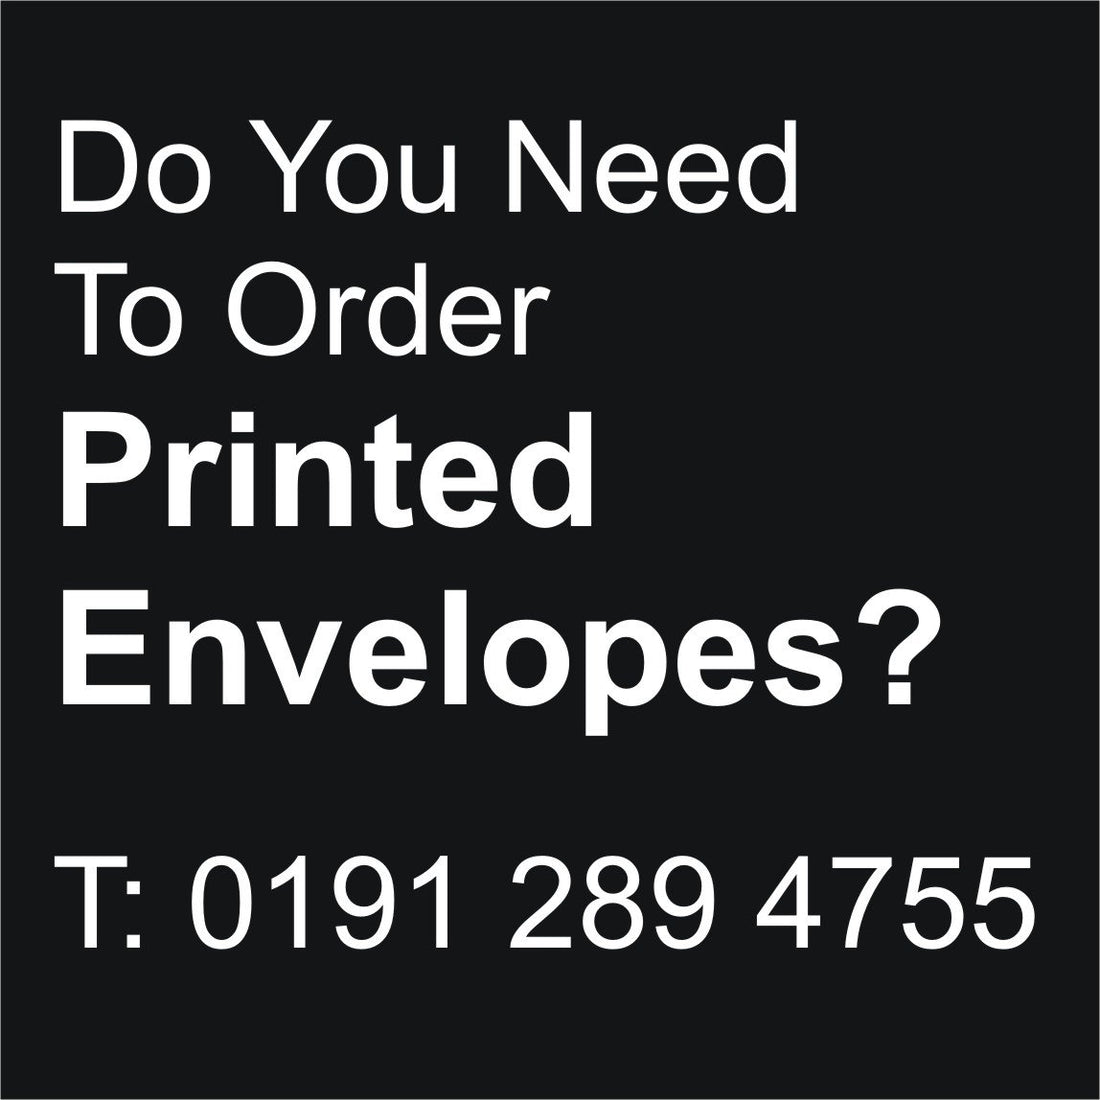 Envelopes - Custom Printed For Your Business!